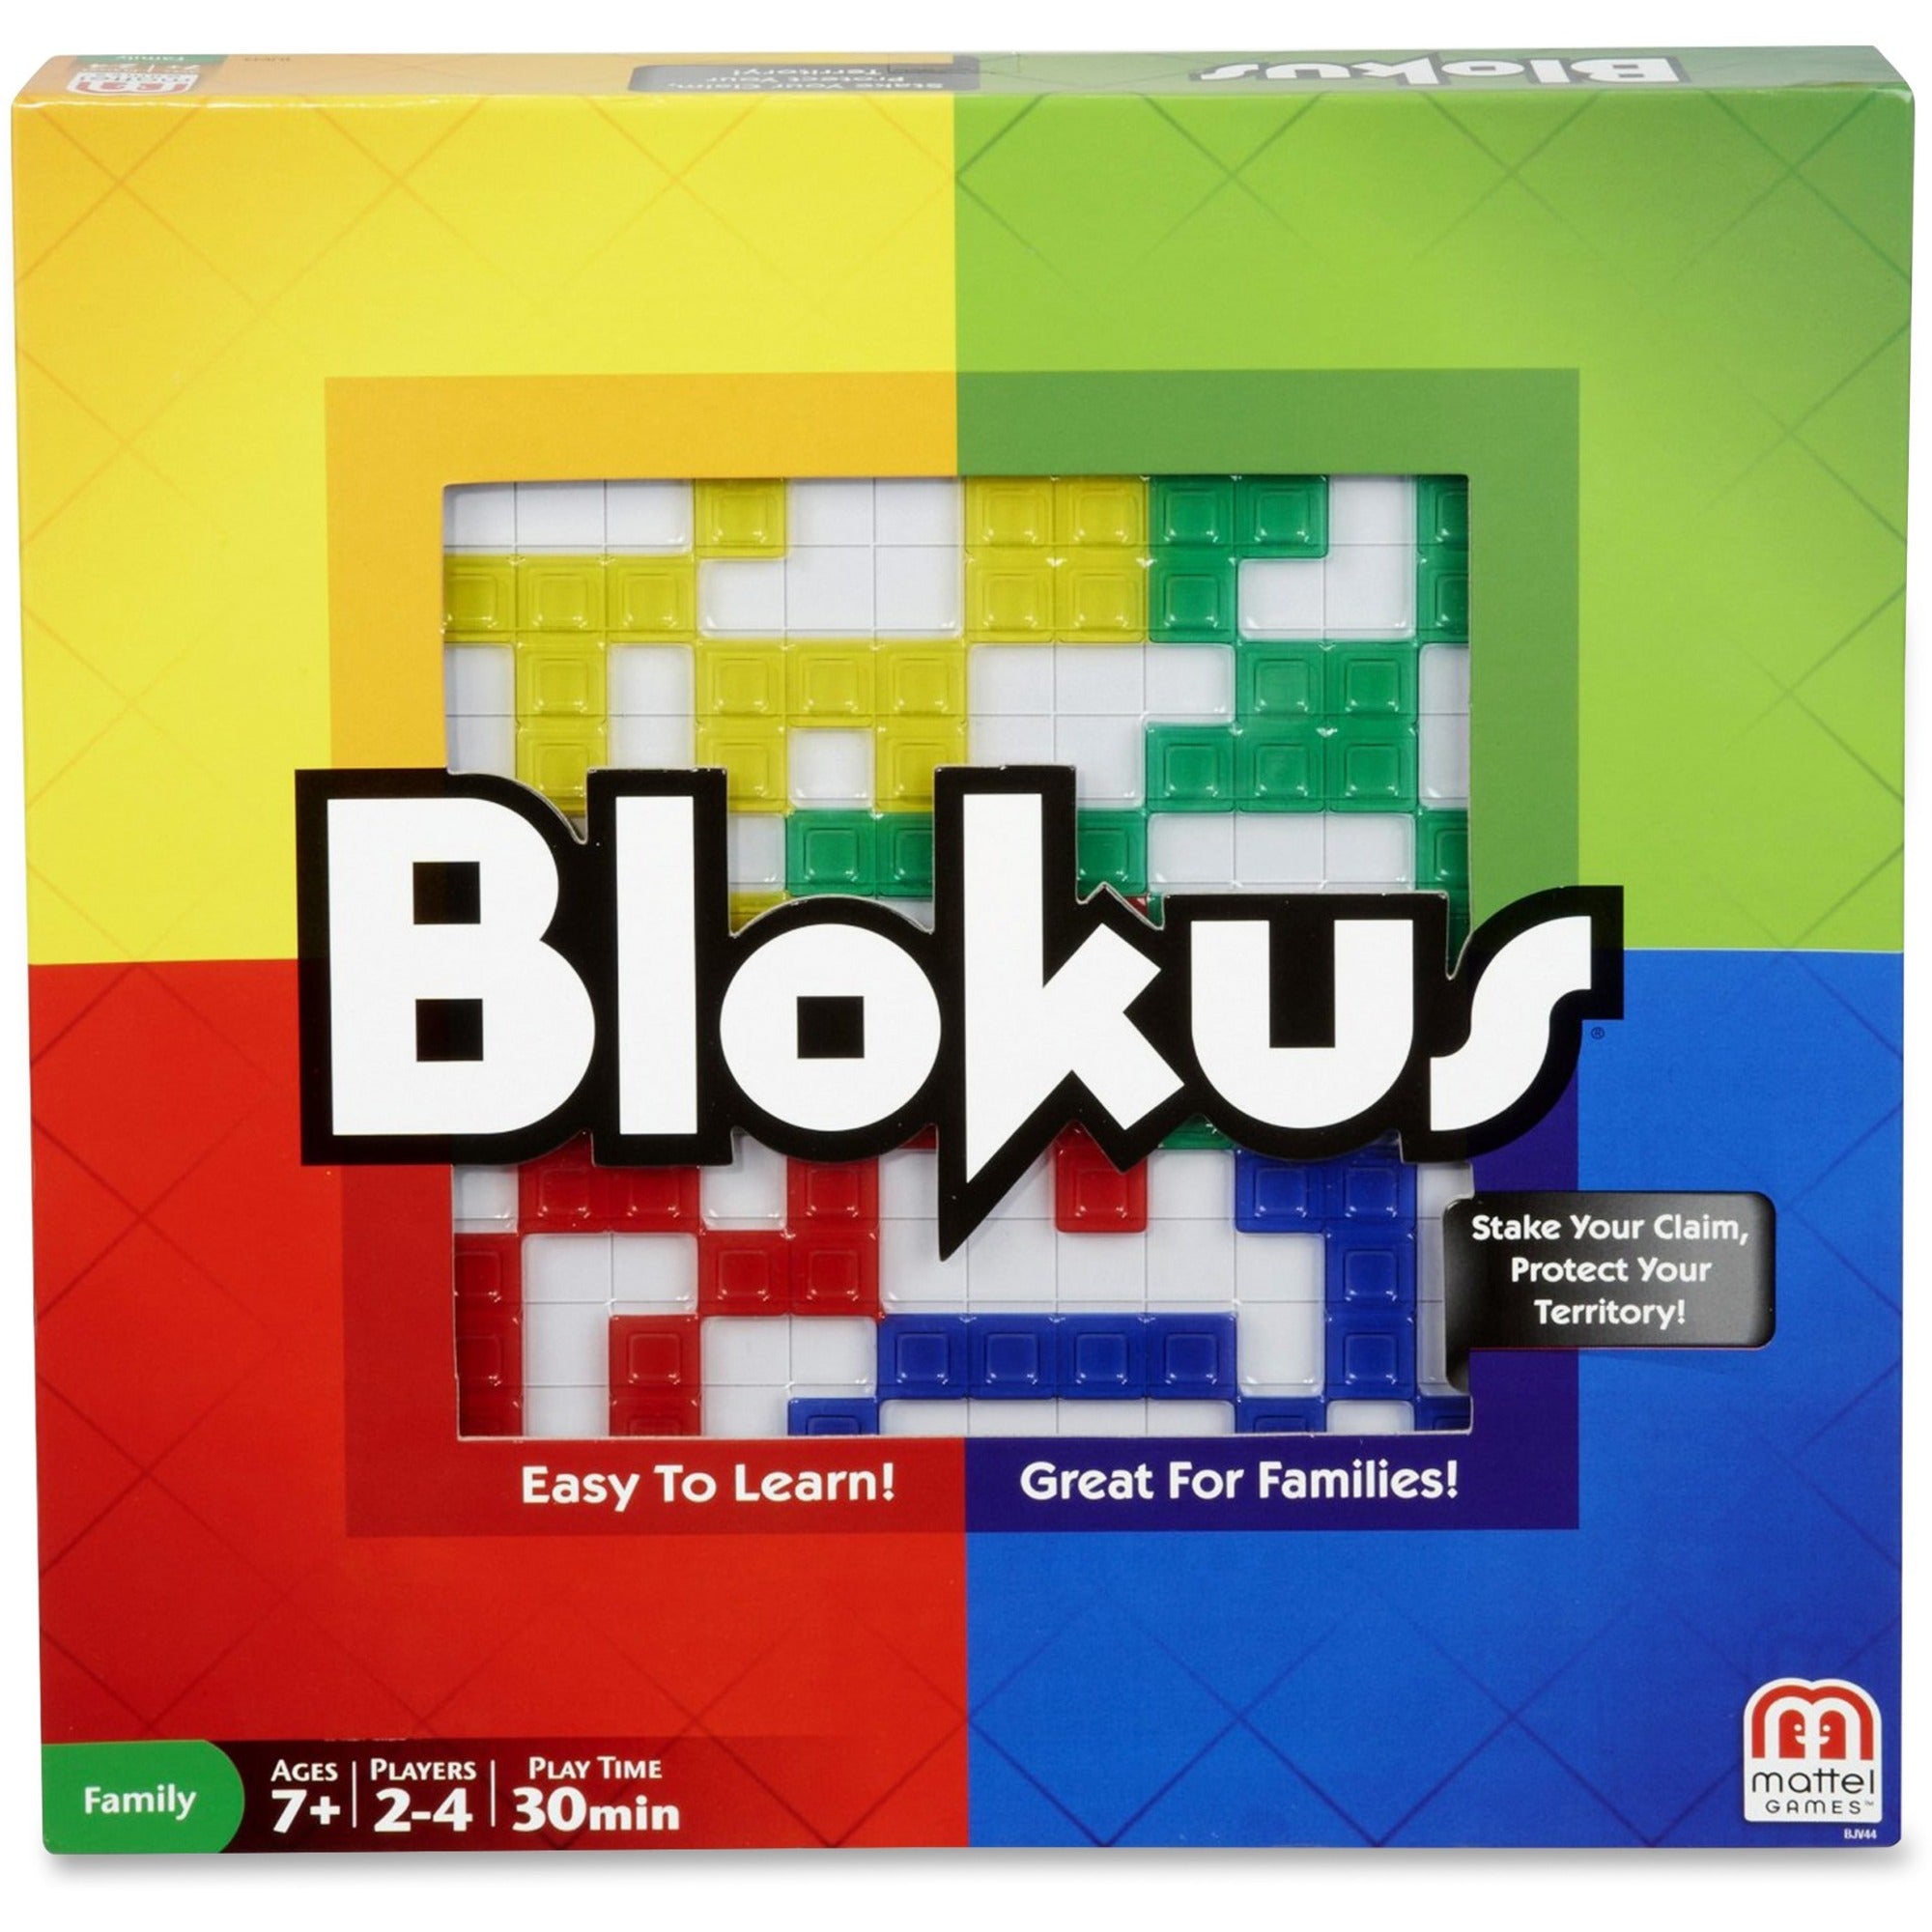 mattel-blokus-game-takes-less-than-1-minute-to-learn-endless-strategy-fun-challenges-for-whole-family_mttbjv44 - 1